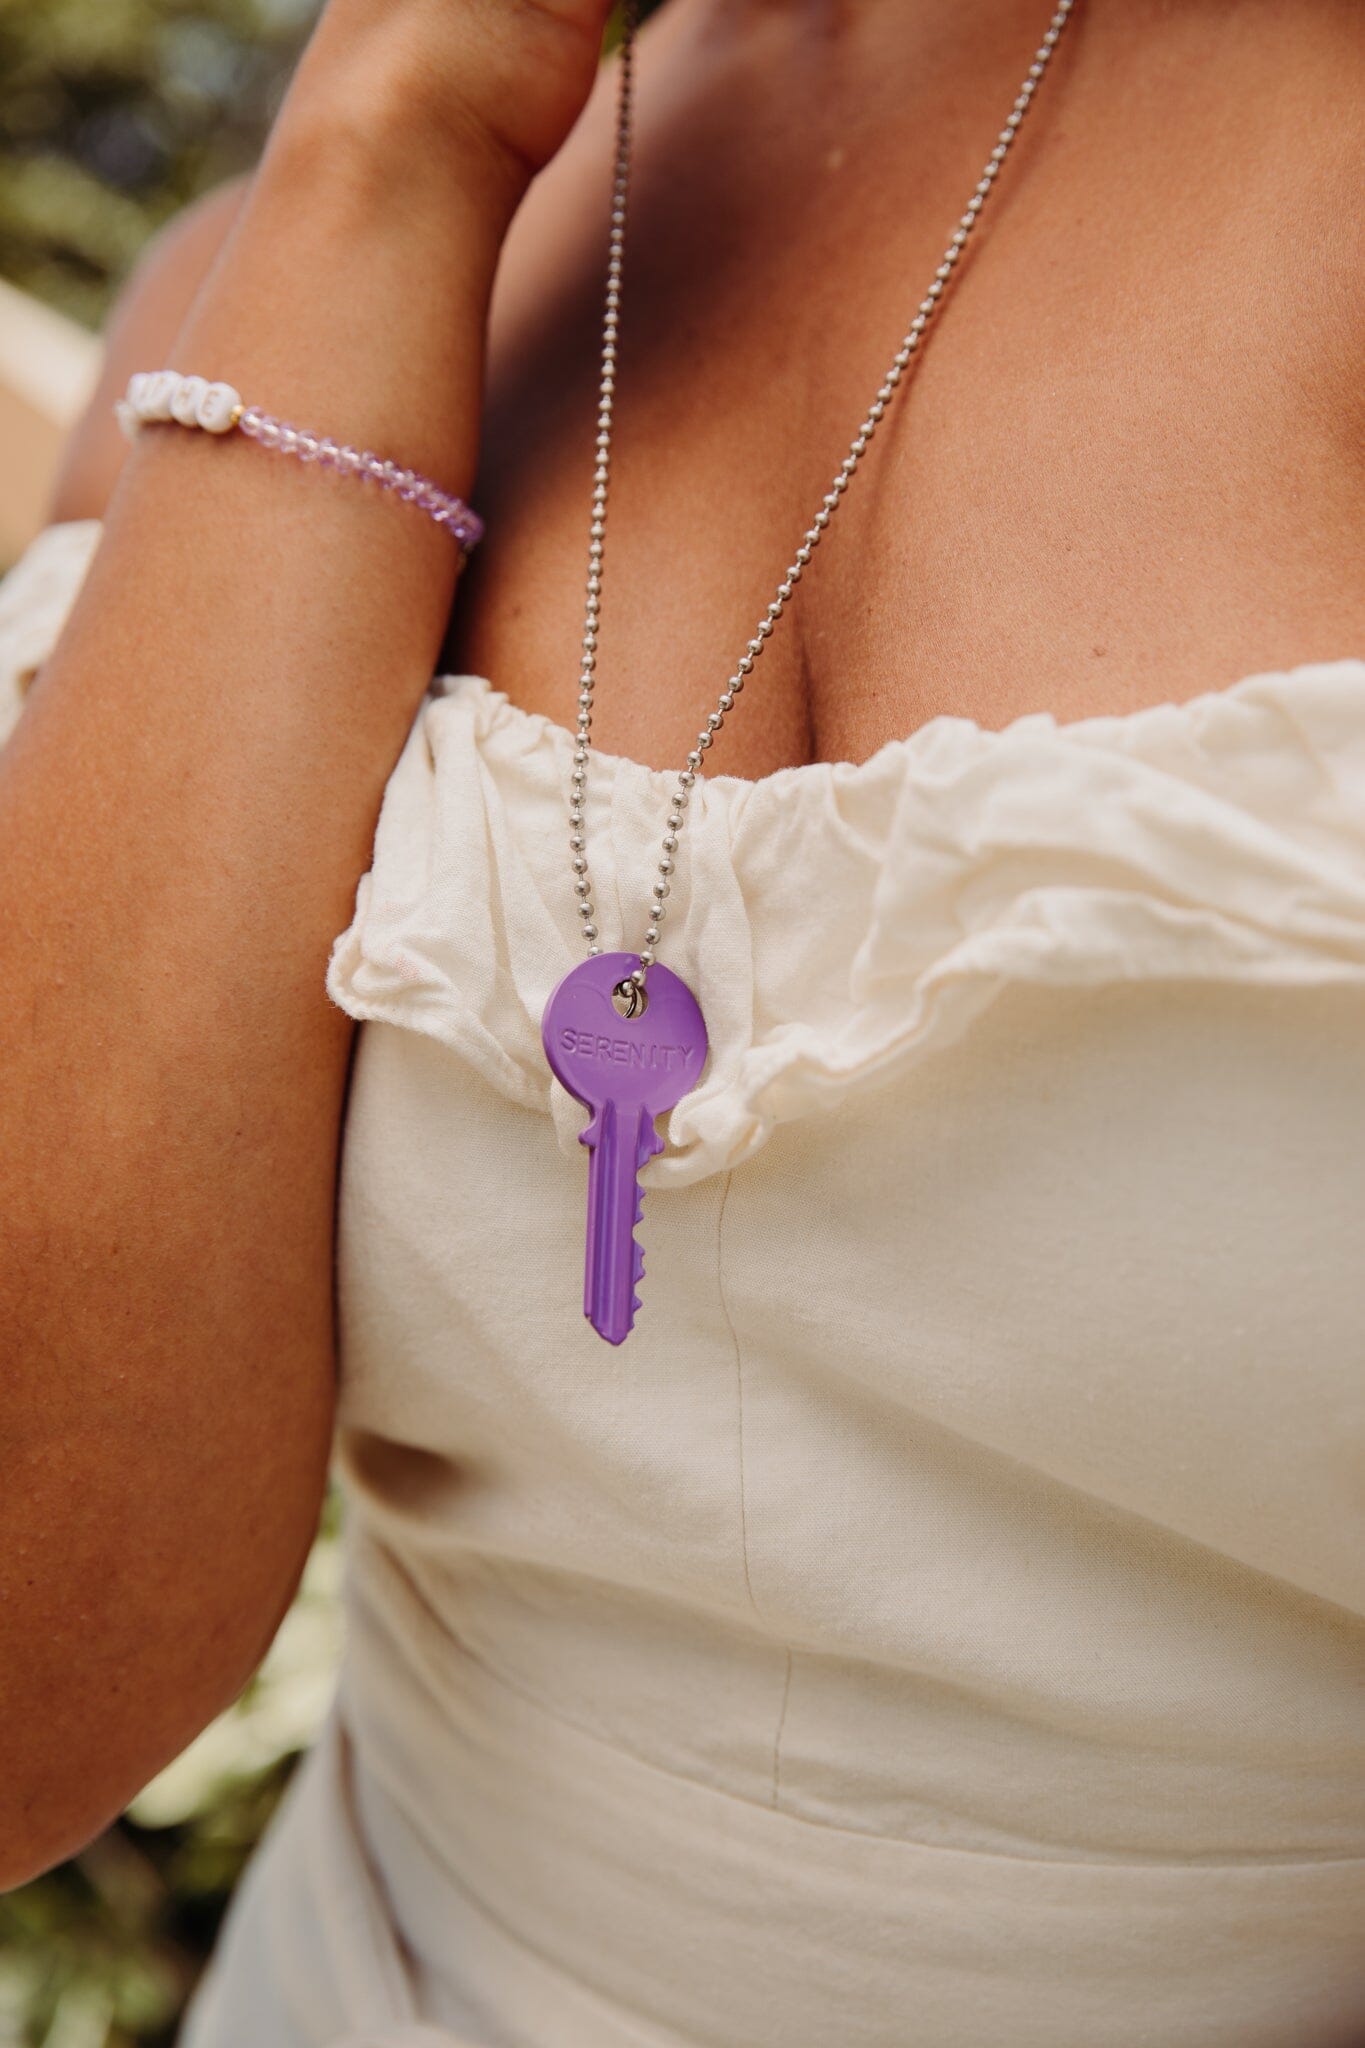 N - Lavender Classic Ball Chain Key Necklace Necklaces The Giving Keys 